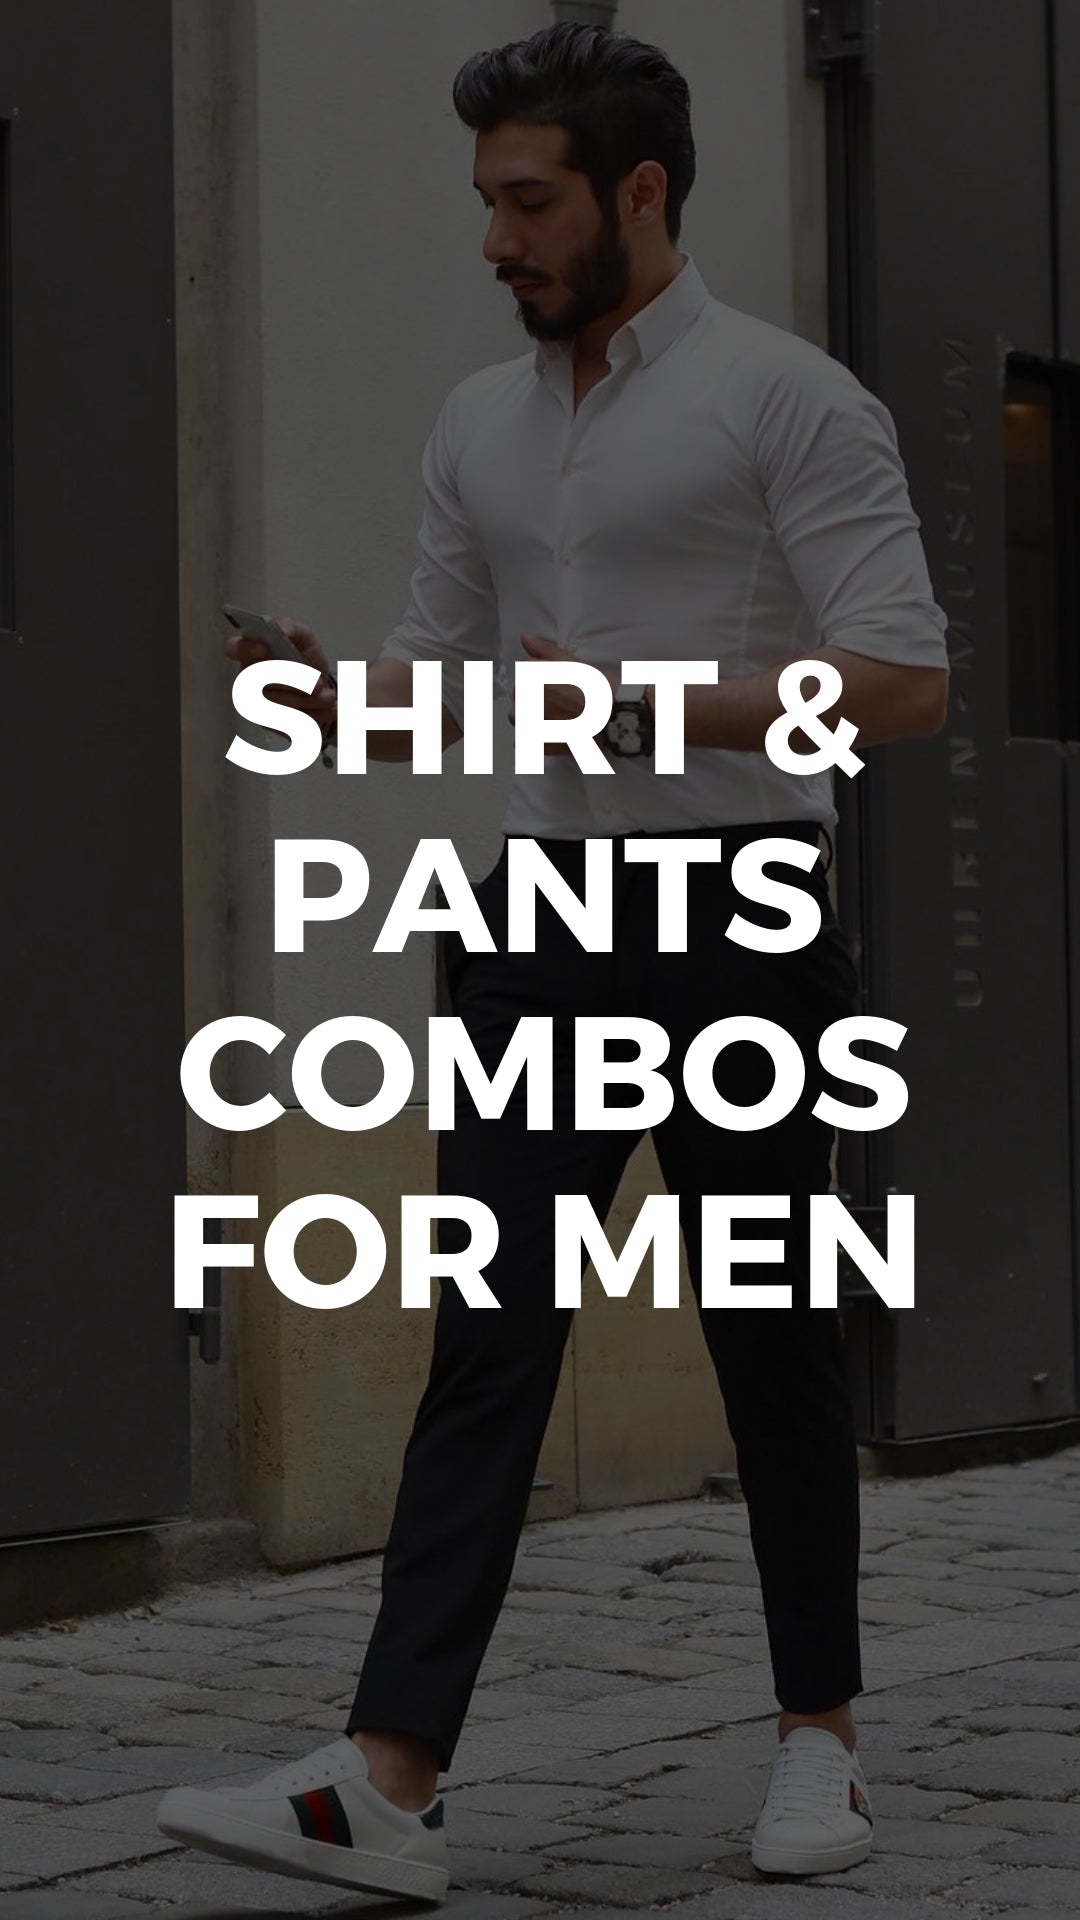 5 Best Shirt And Pant Combinations For Men #shirts #pants #mens #fashion